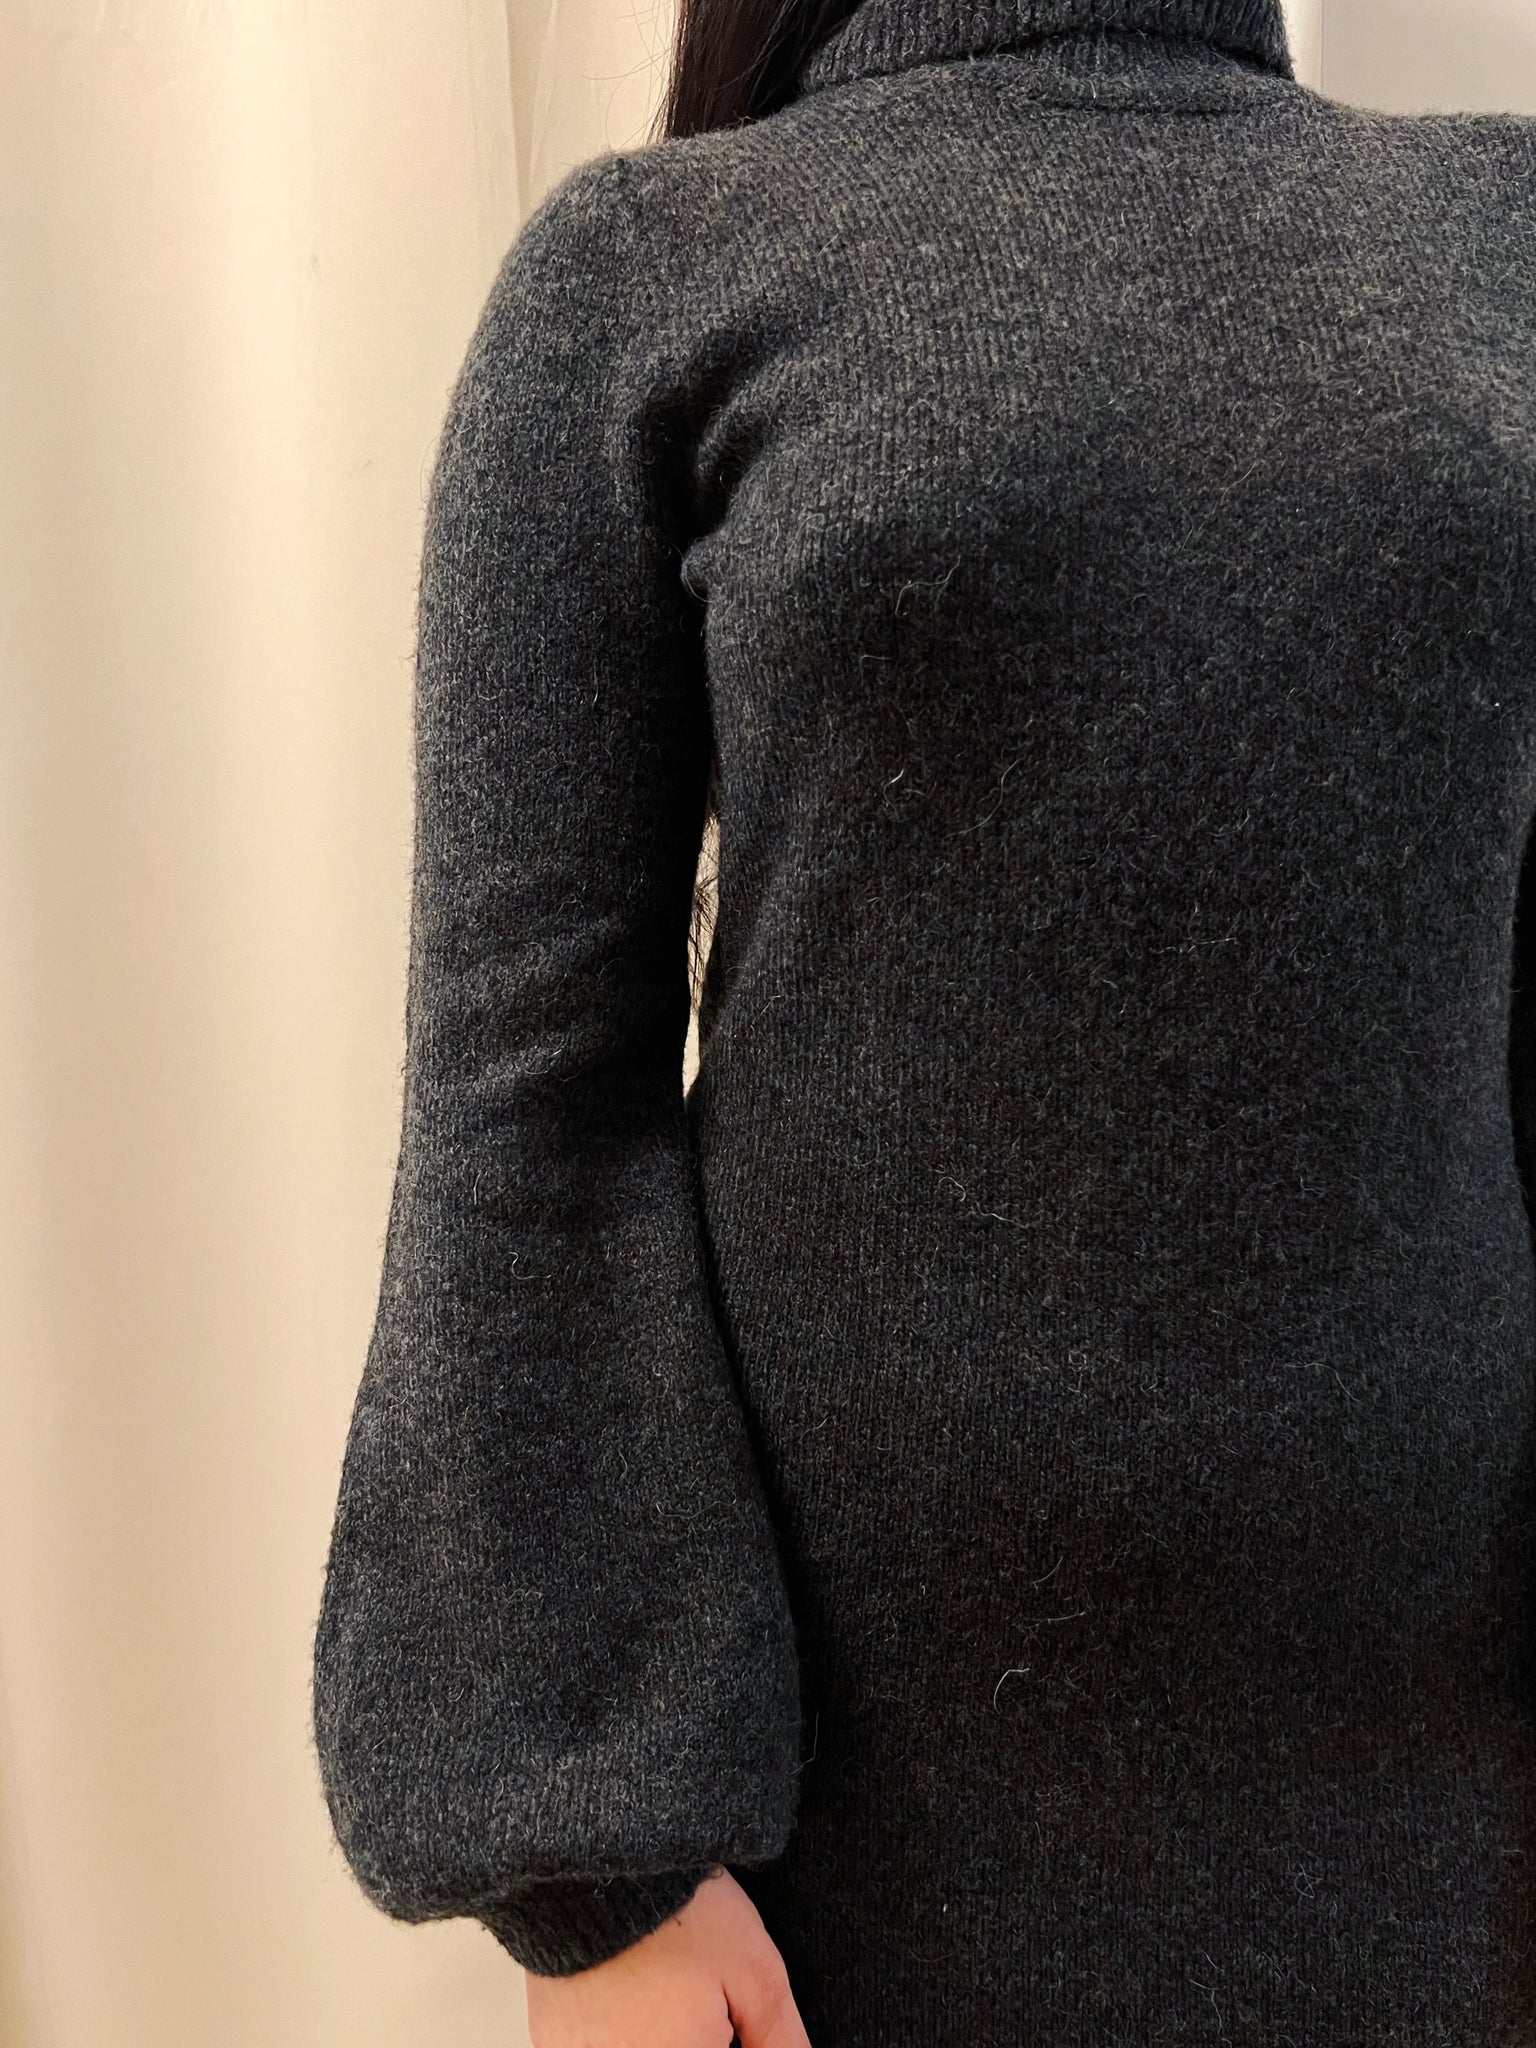 Close up image of woman wearing a turtleneck dress showing the composition of the dress